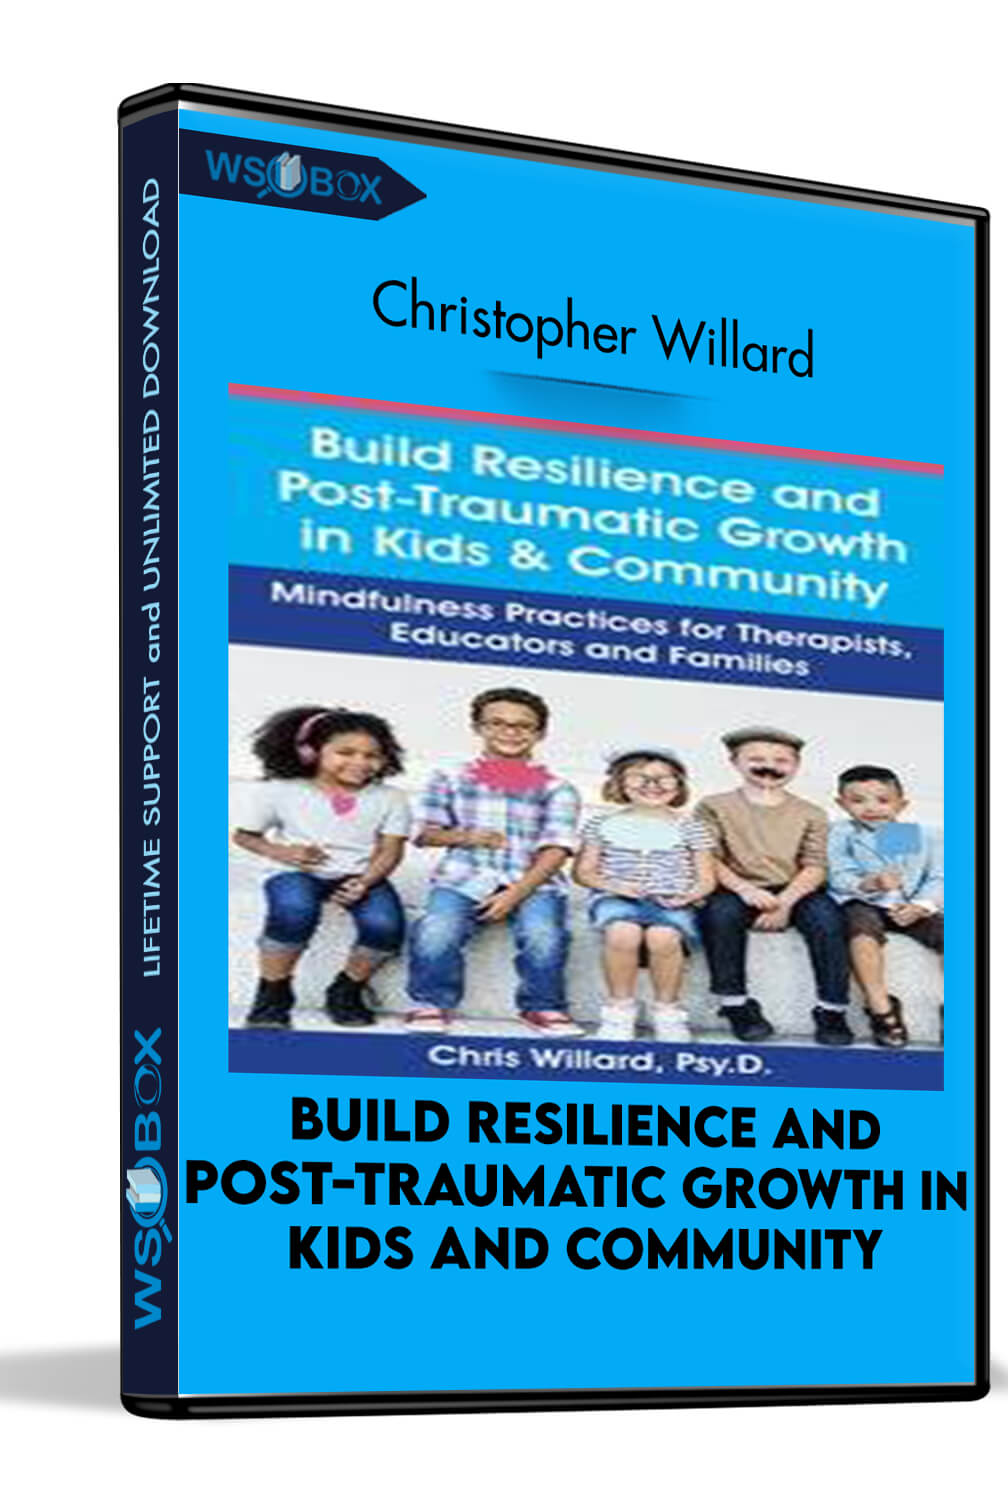 Build Resilience and Post-Traumatic Growth in Kids and Community: Mindfulness Practices for Therapists, Educators and Families – Christopher Willard